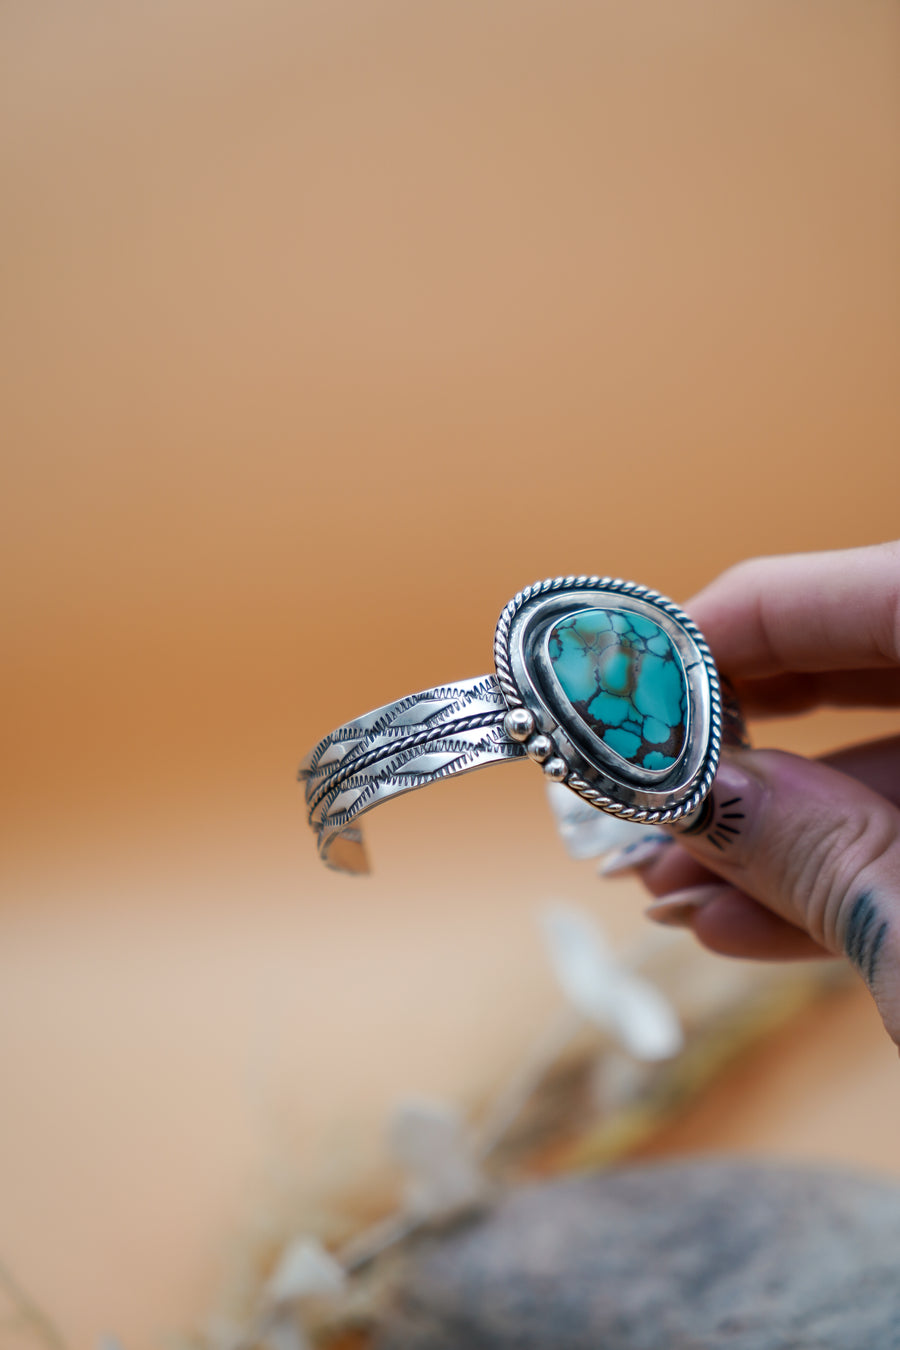 Statement Cuff in Turquoise